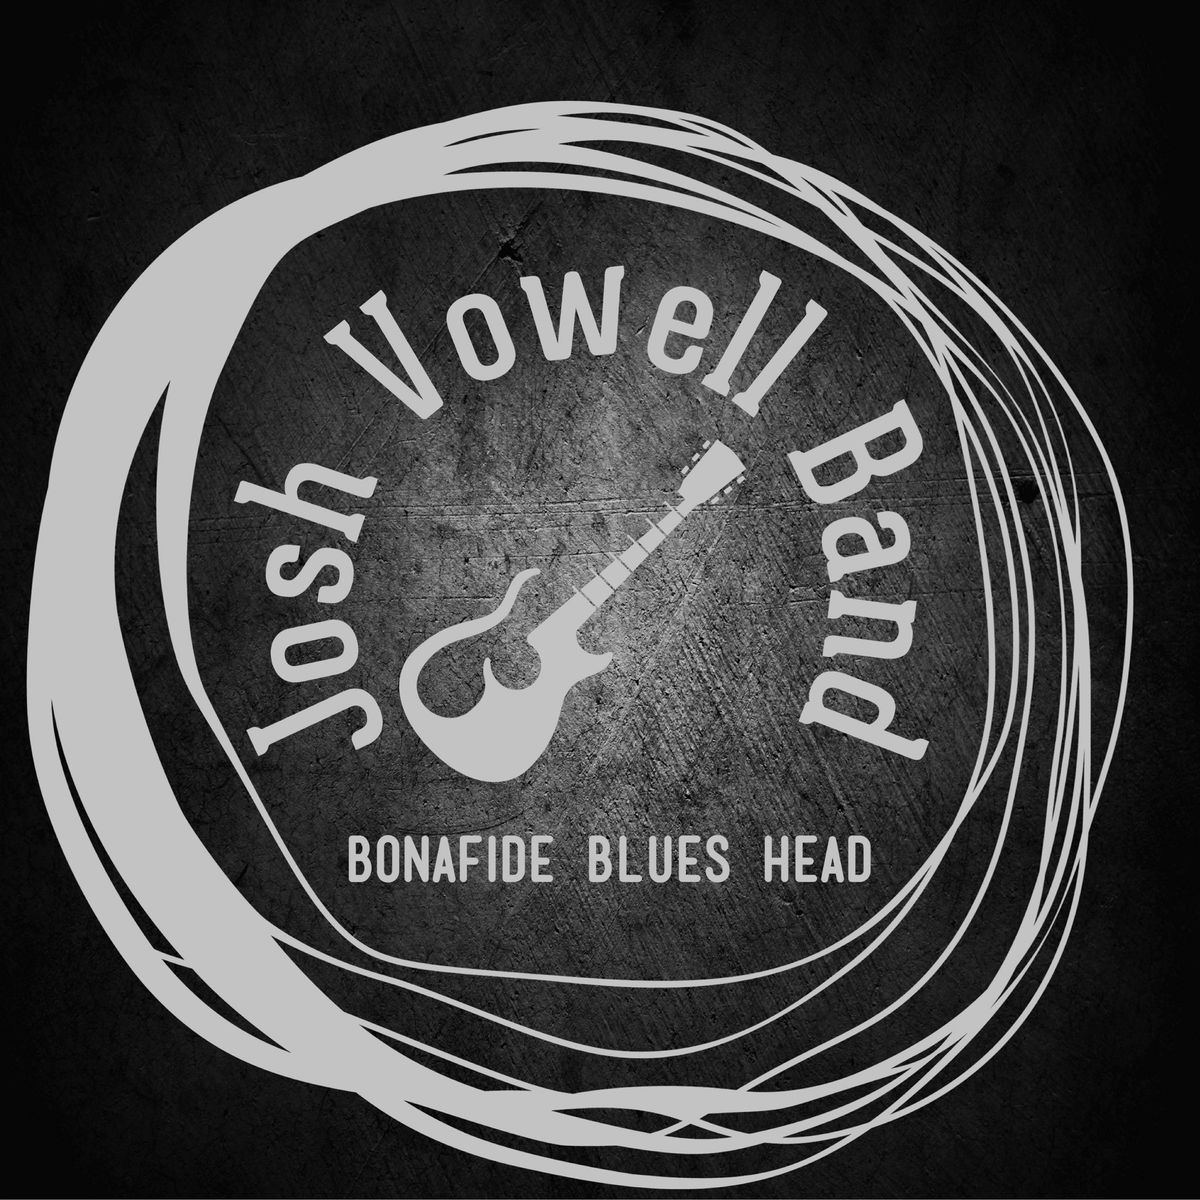 Josh Vowell Band @ The Barrel House